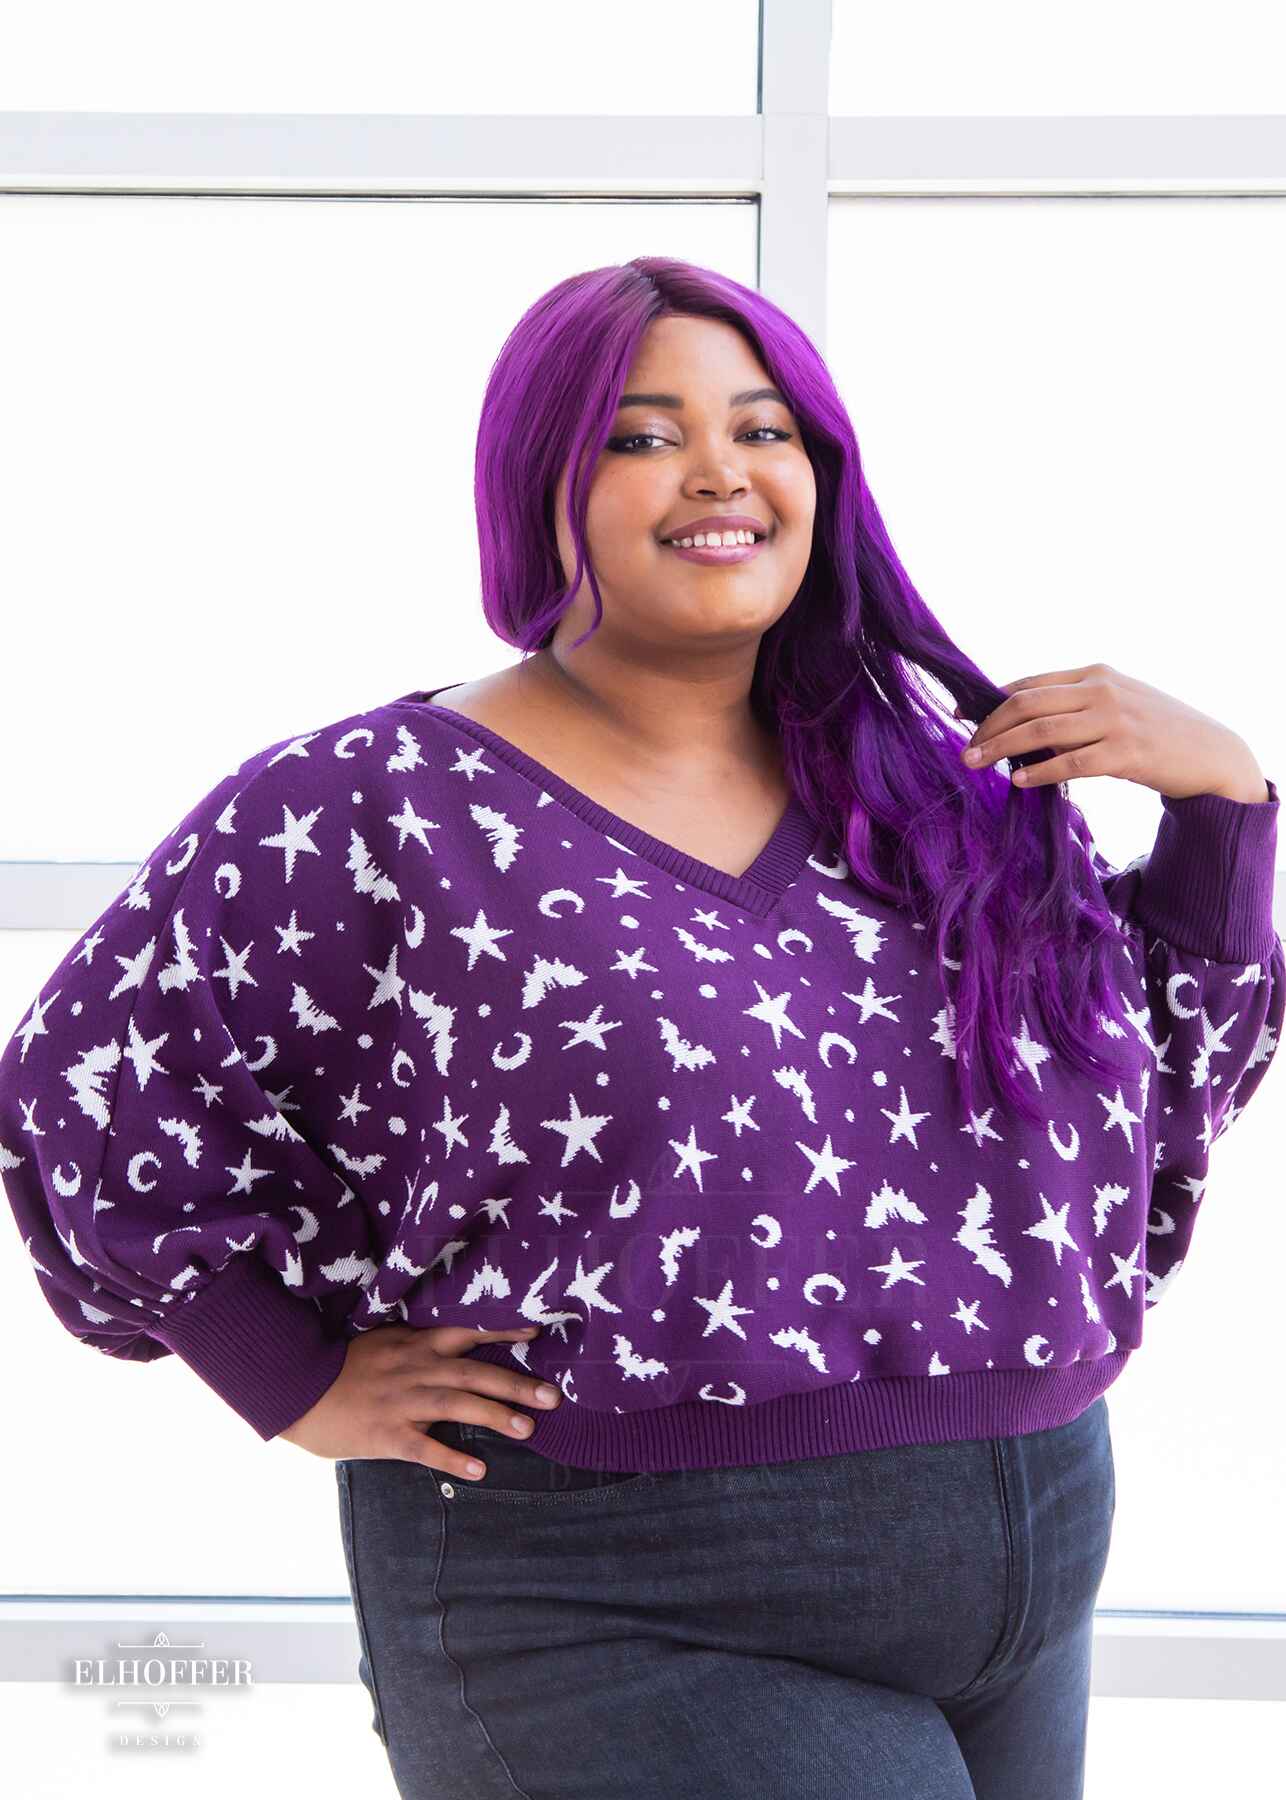 Jade, a light skinned 2xl model with long wavy purple hair, is smiling while wearing an oversized v neck cropped sweater with batwing sleeves that gather at the wrist. The main body of the sweater is purple with a white bat, star, moon, and dot pattern repeated throughout.